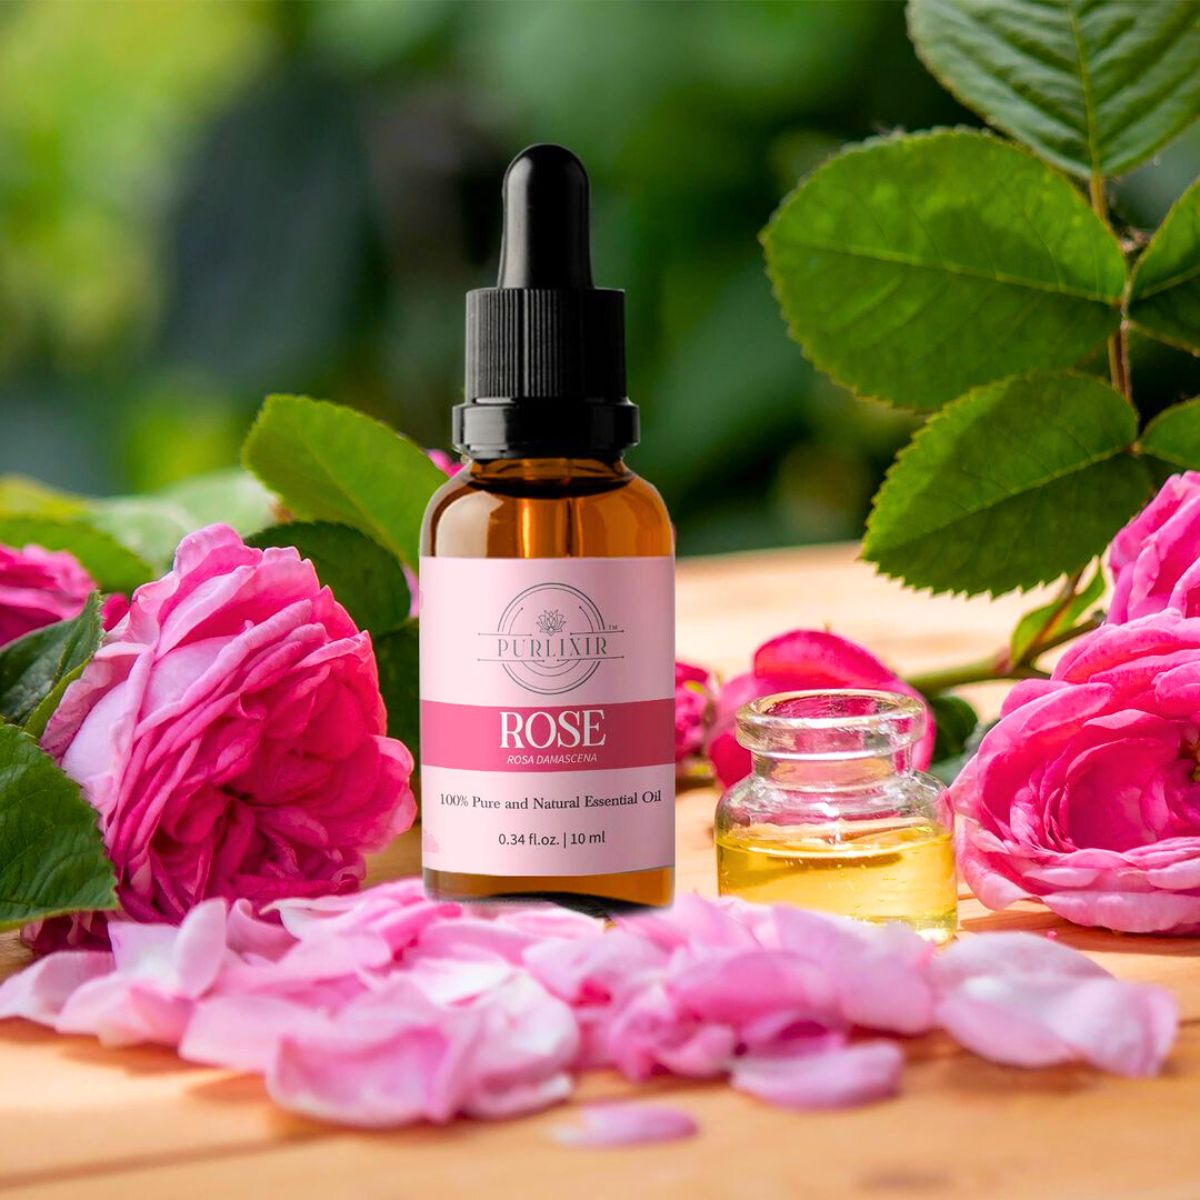 Benefits of rose oil